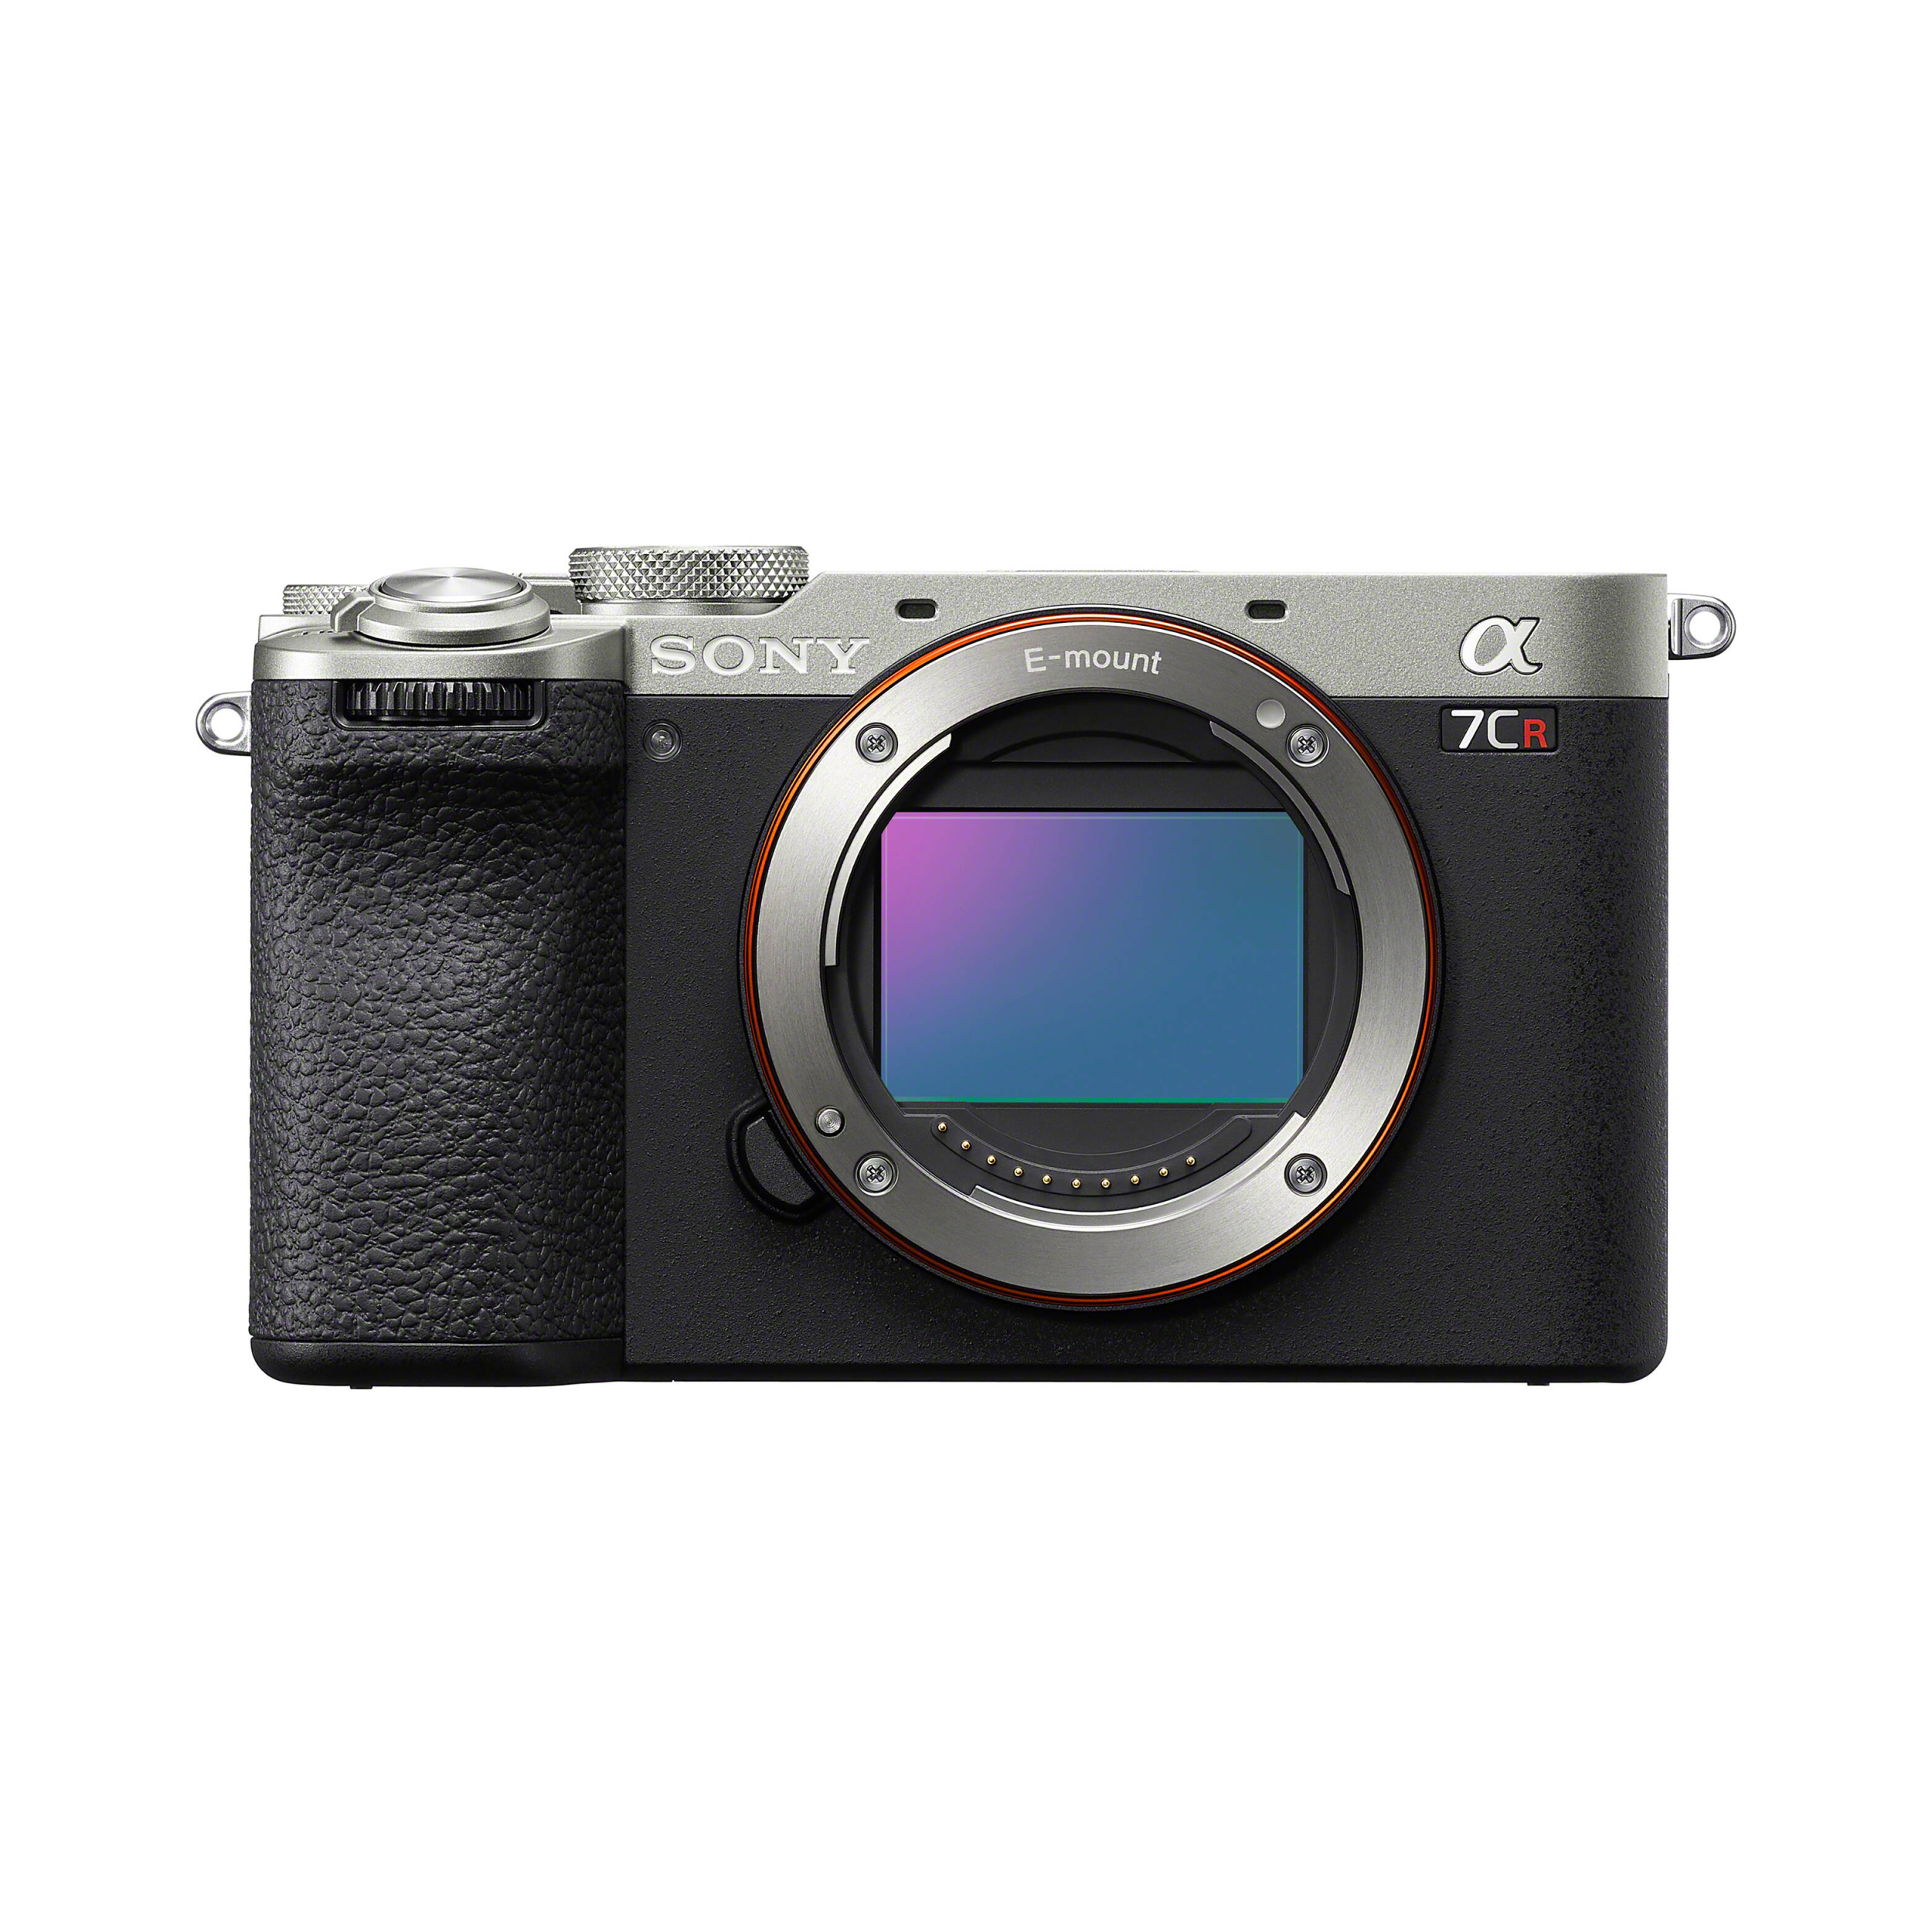 Sony a7C II Mirrorless Camera with 28-60mm Lens - Silver